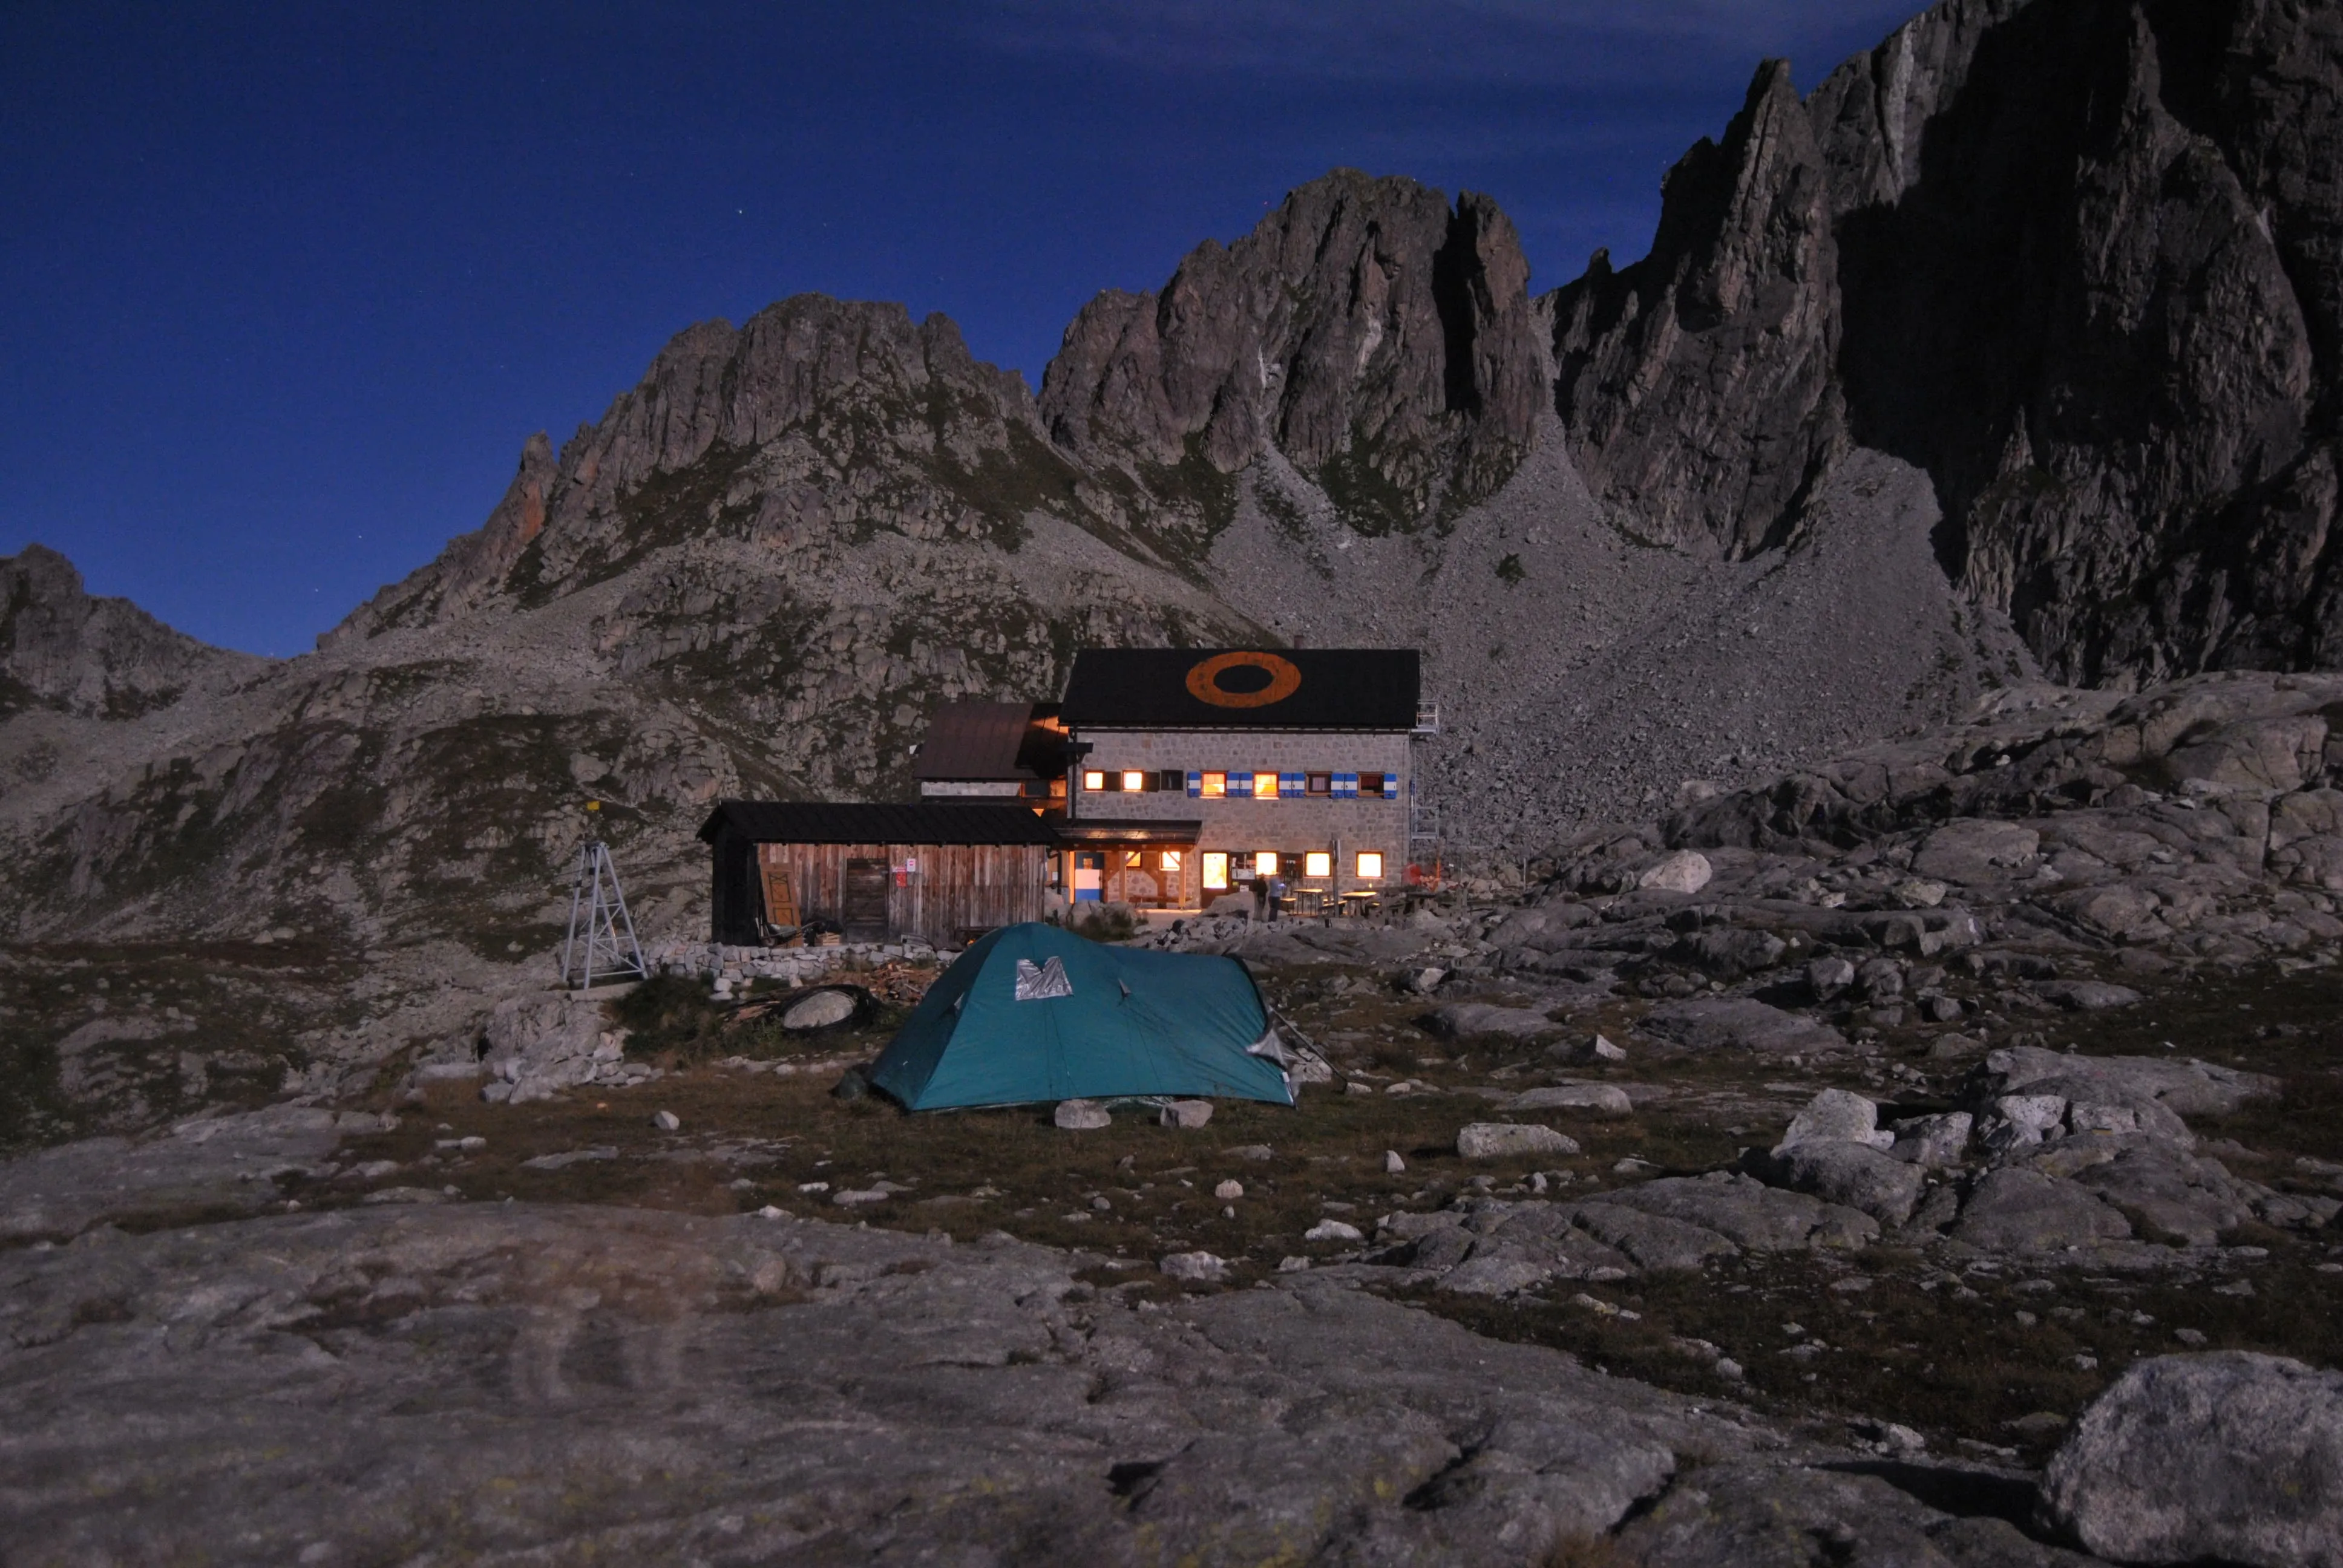 Medium Alta Via del Granito - Including accommodation before and after 5